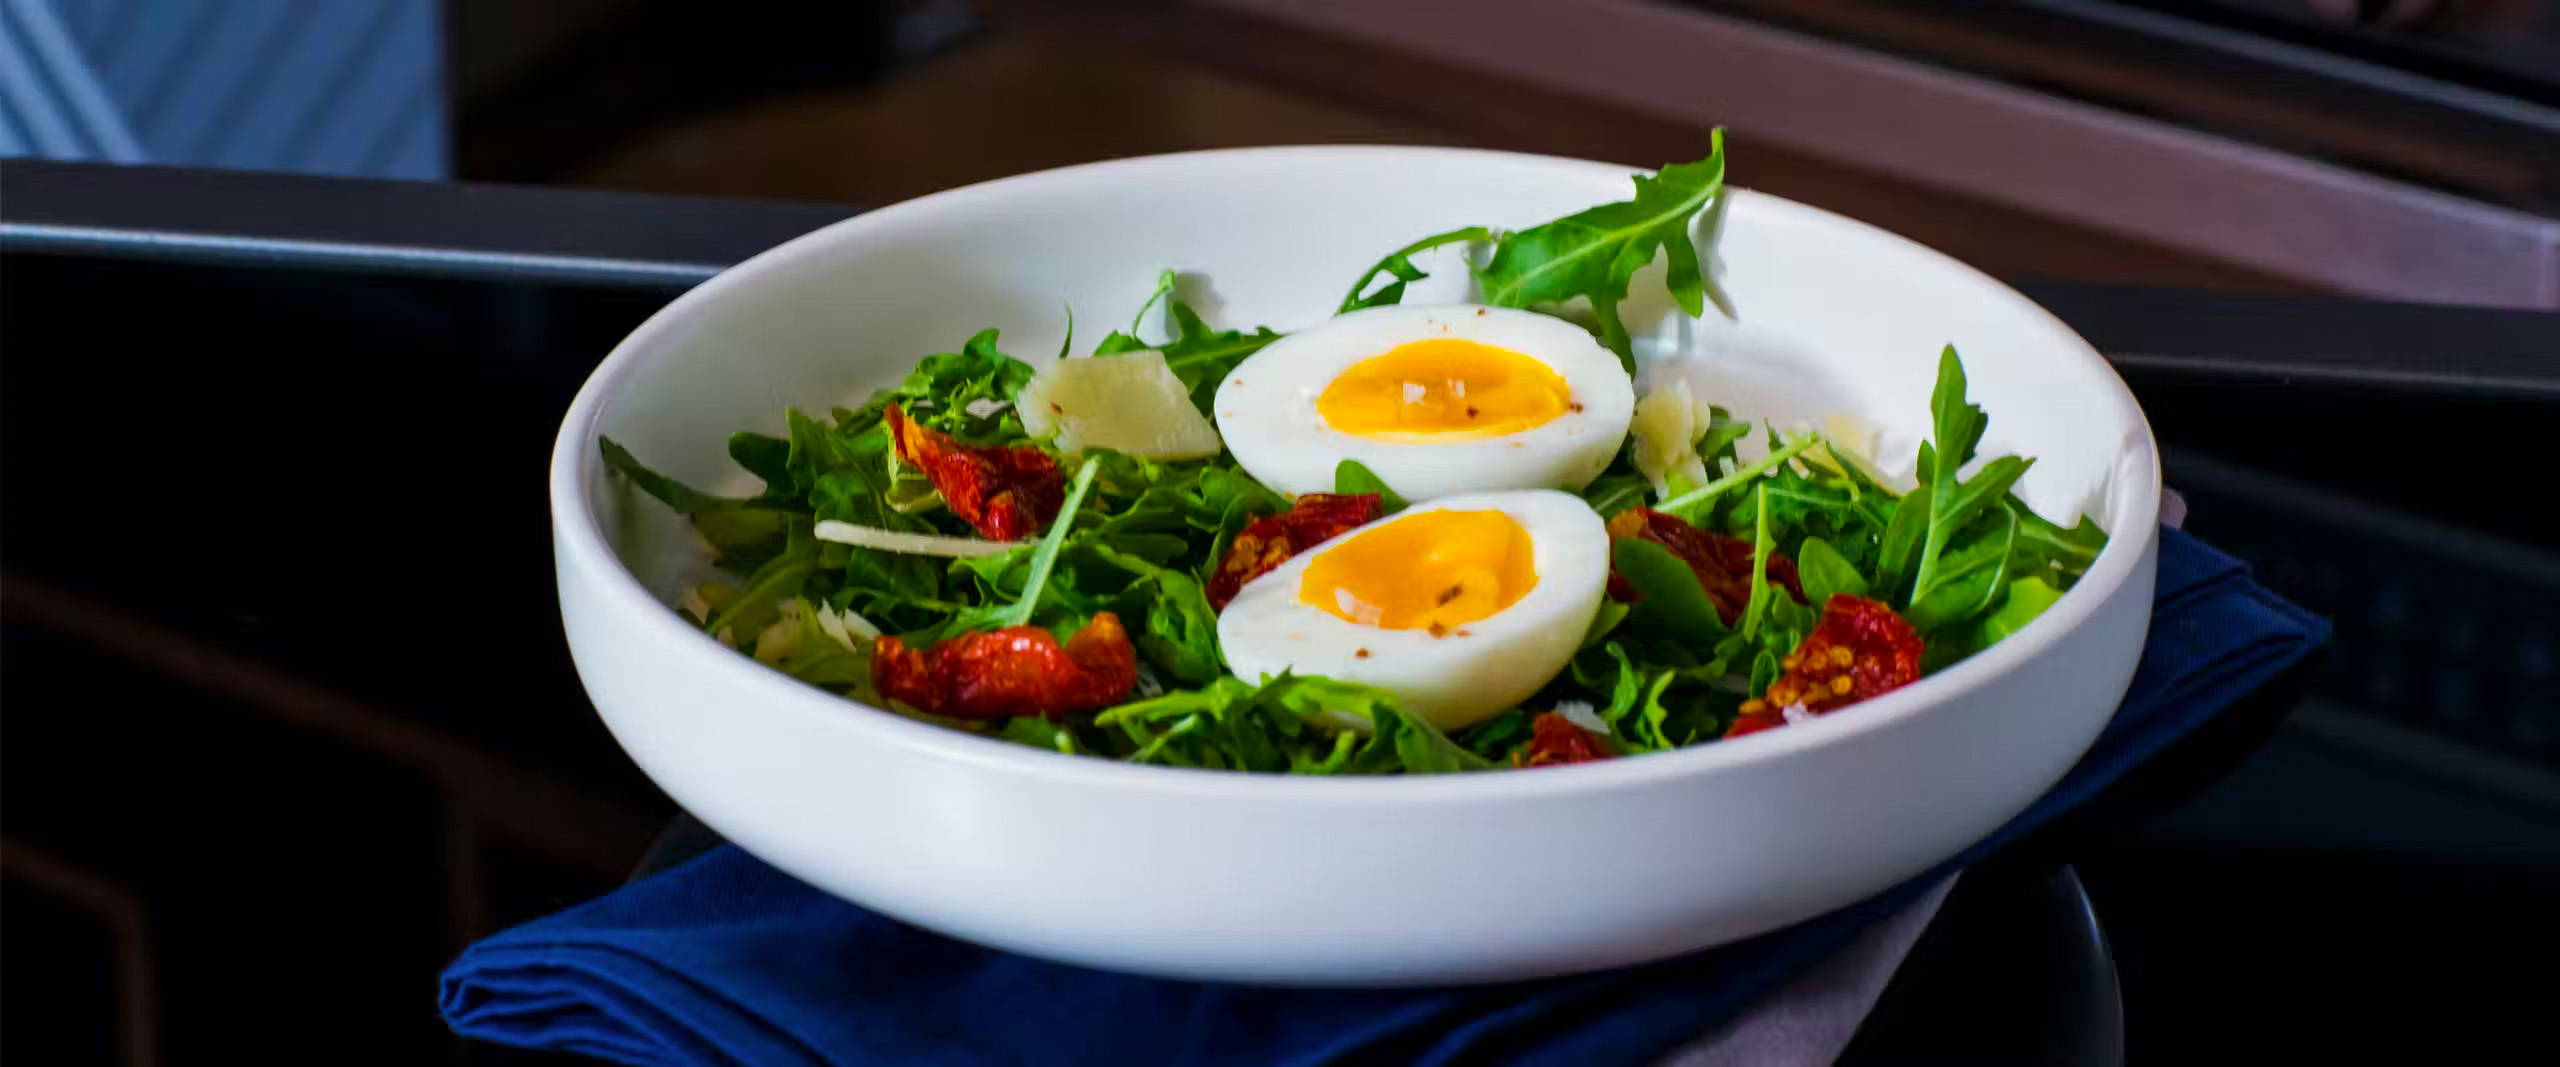 Bowl of salad with two boiled egg halves on top